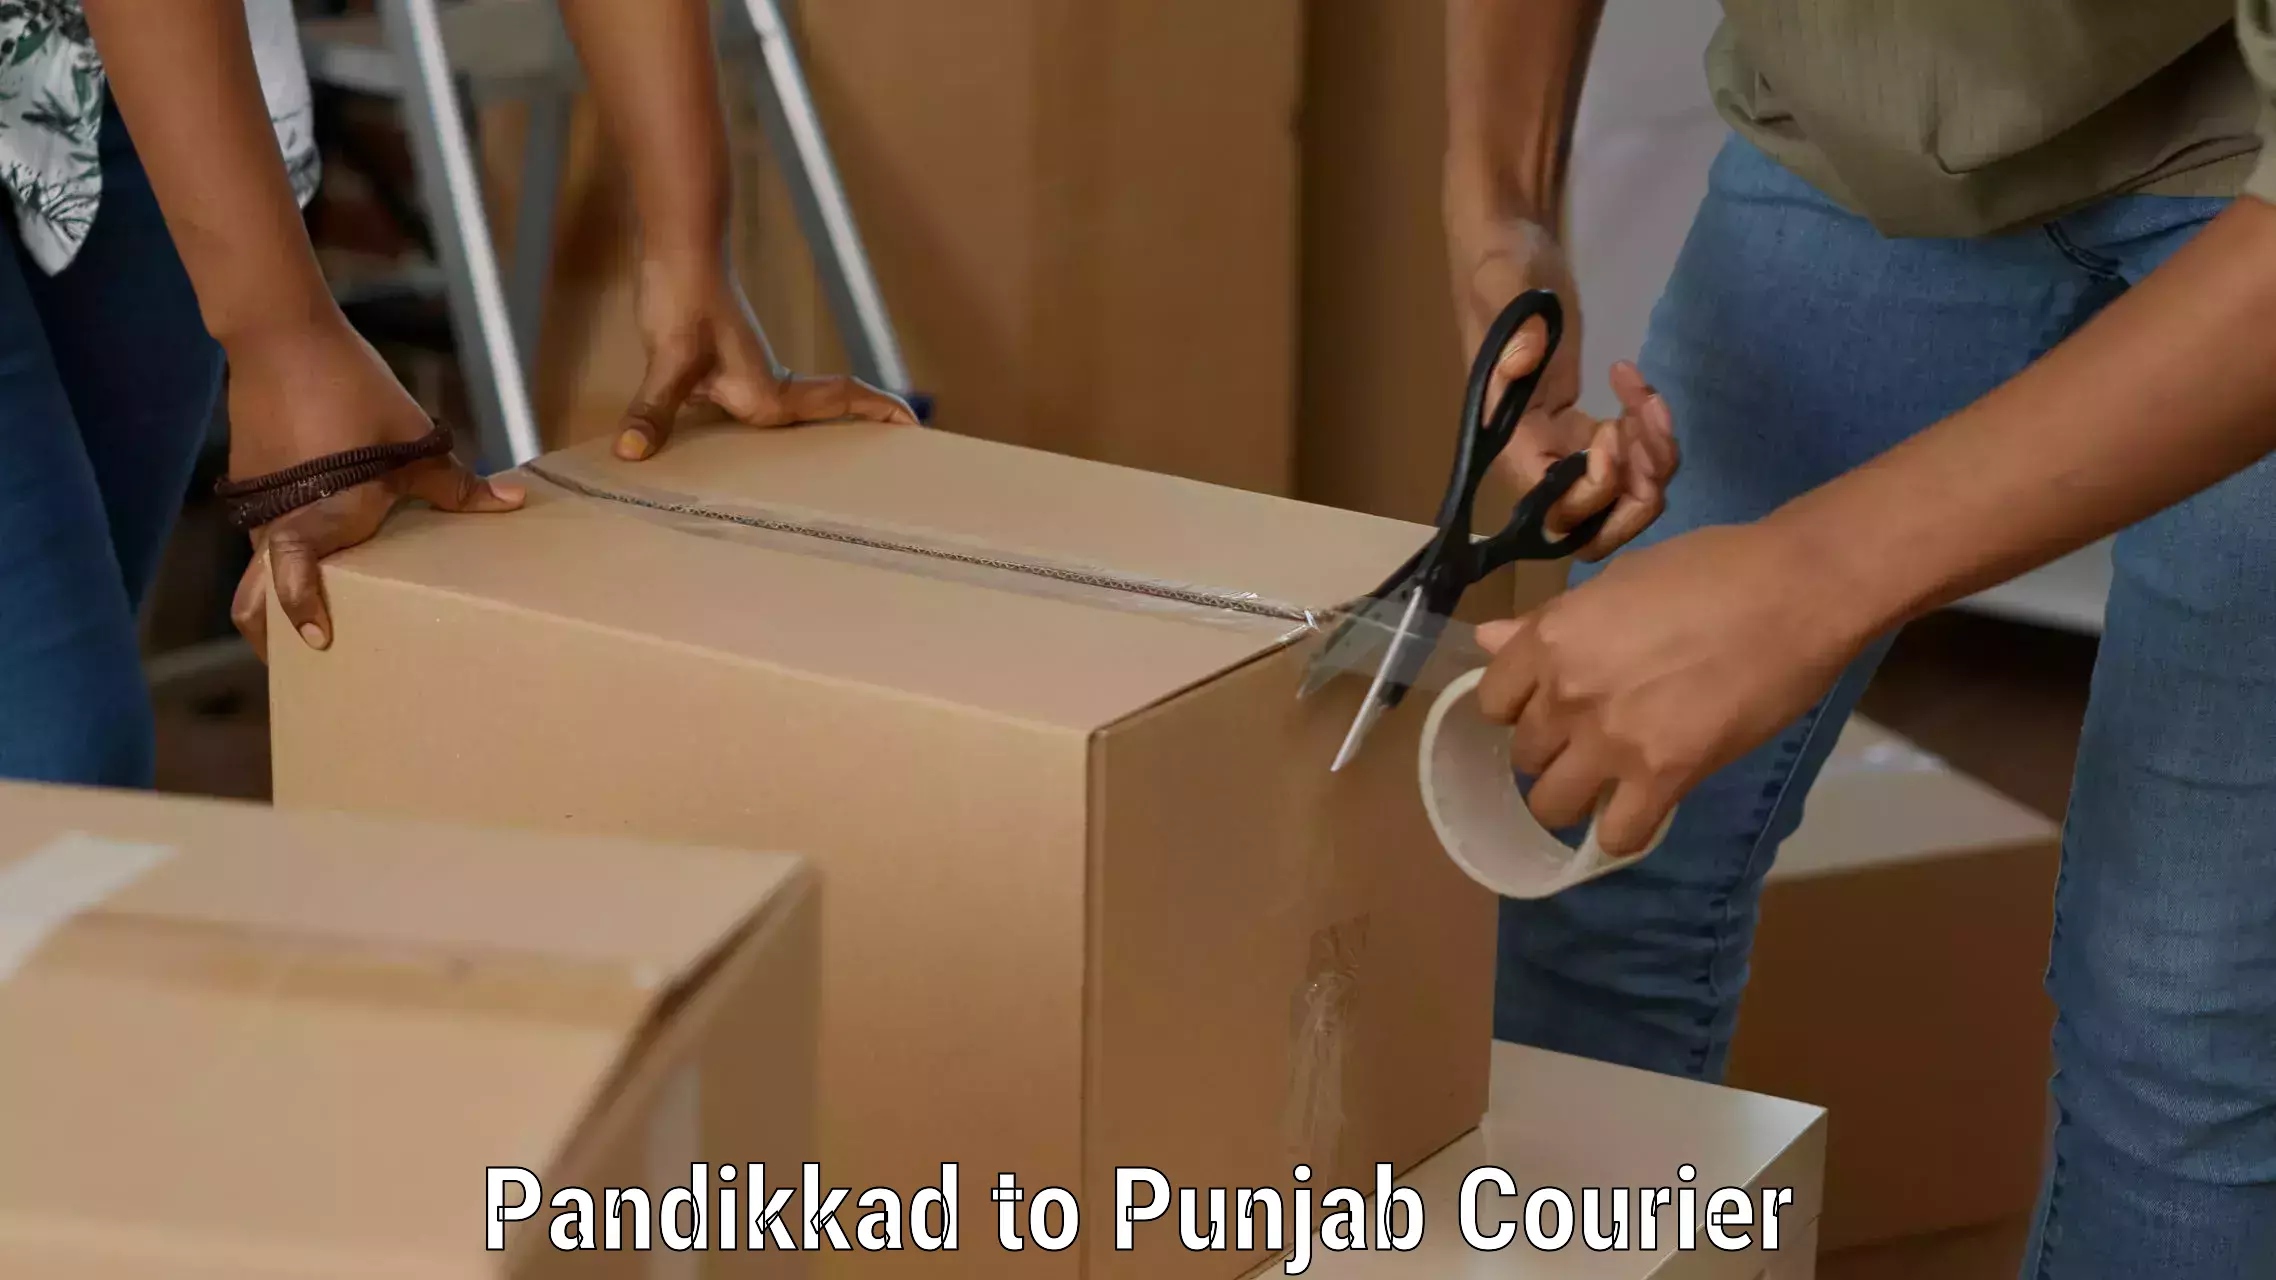 Expedited parcel delivery in Pandikkad to Goindwal Sahib